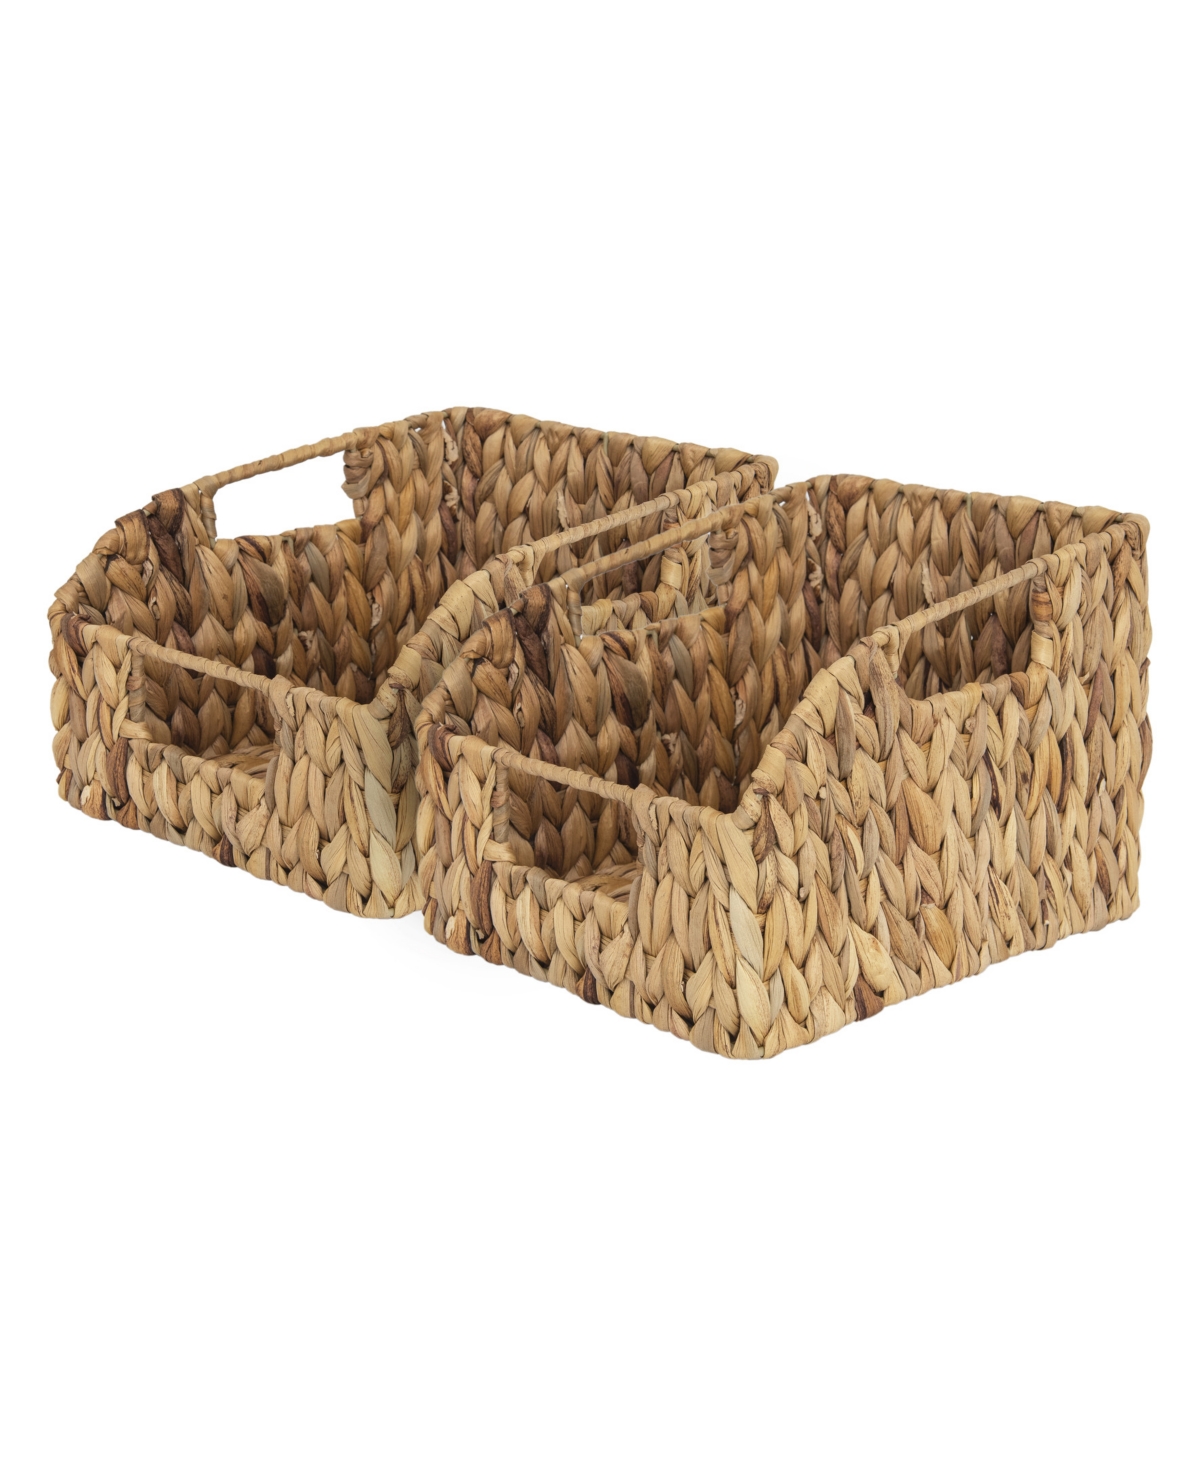 Wethinkstorage Set Of 2 10.5-liter Capacity Hand-woven Seagrass Basket In Natural